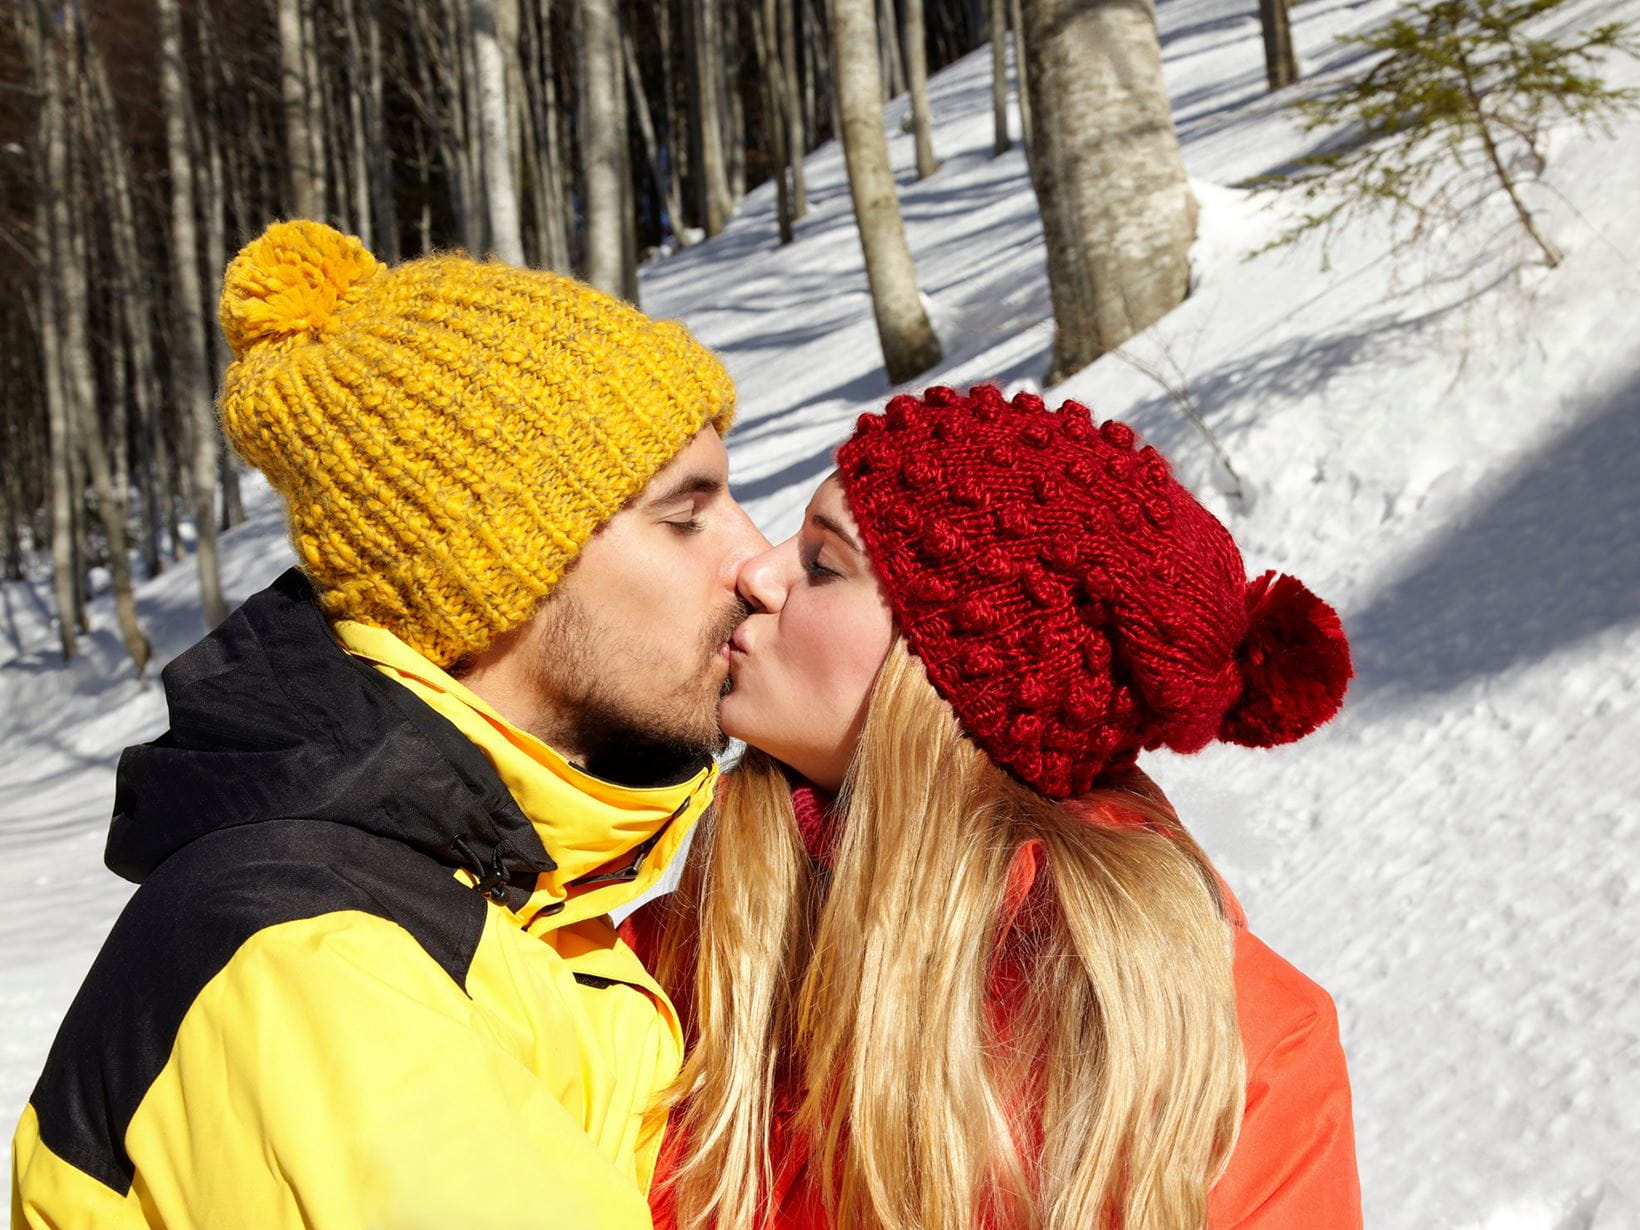 View of a male model wearing a yellow winter hat and jacket and a female model wearing a red winter hat and jacket kissing outdoors with a snow covered forest background.